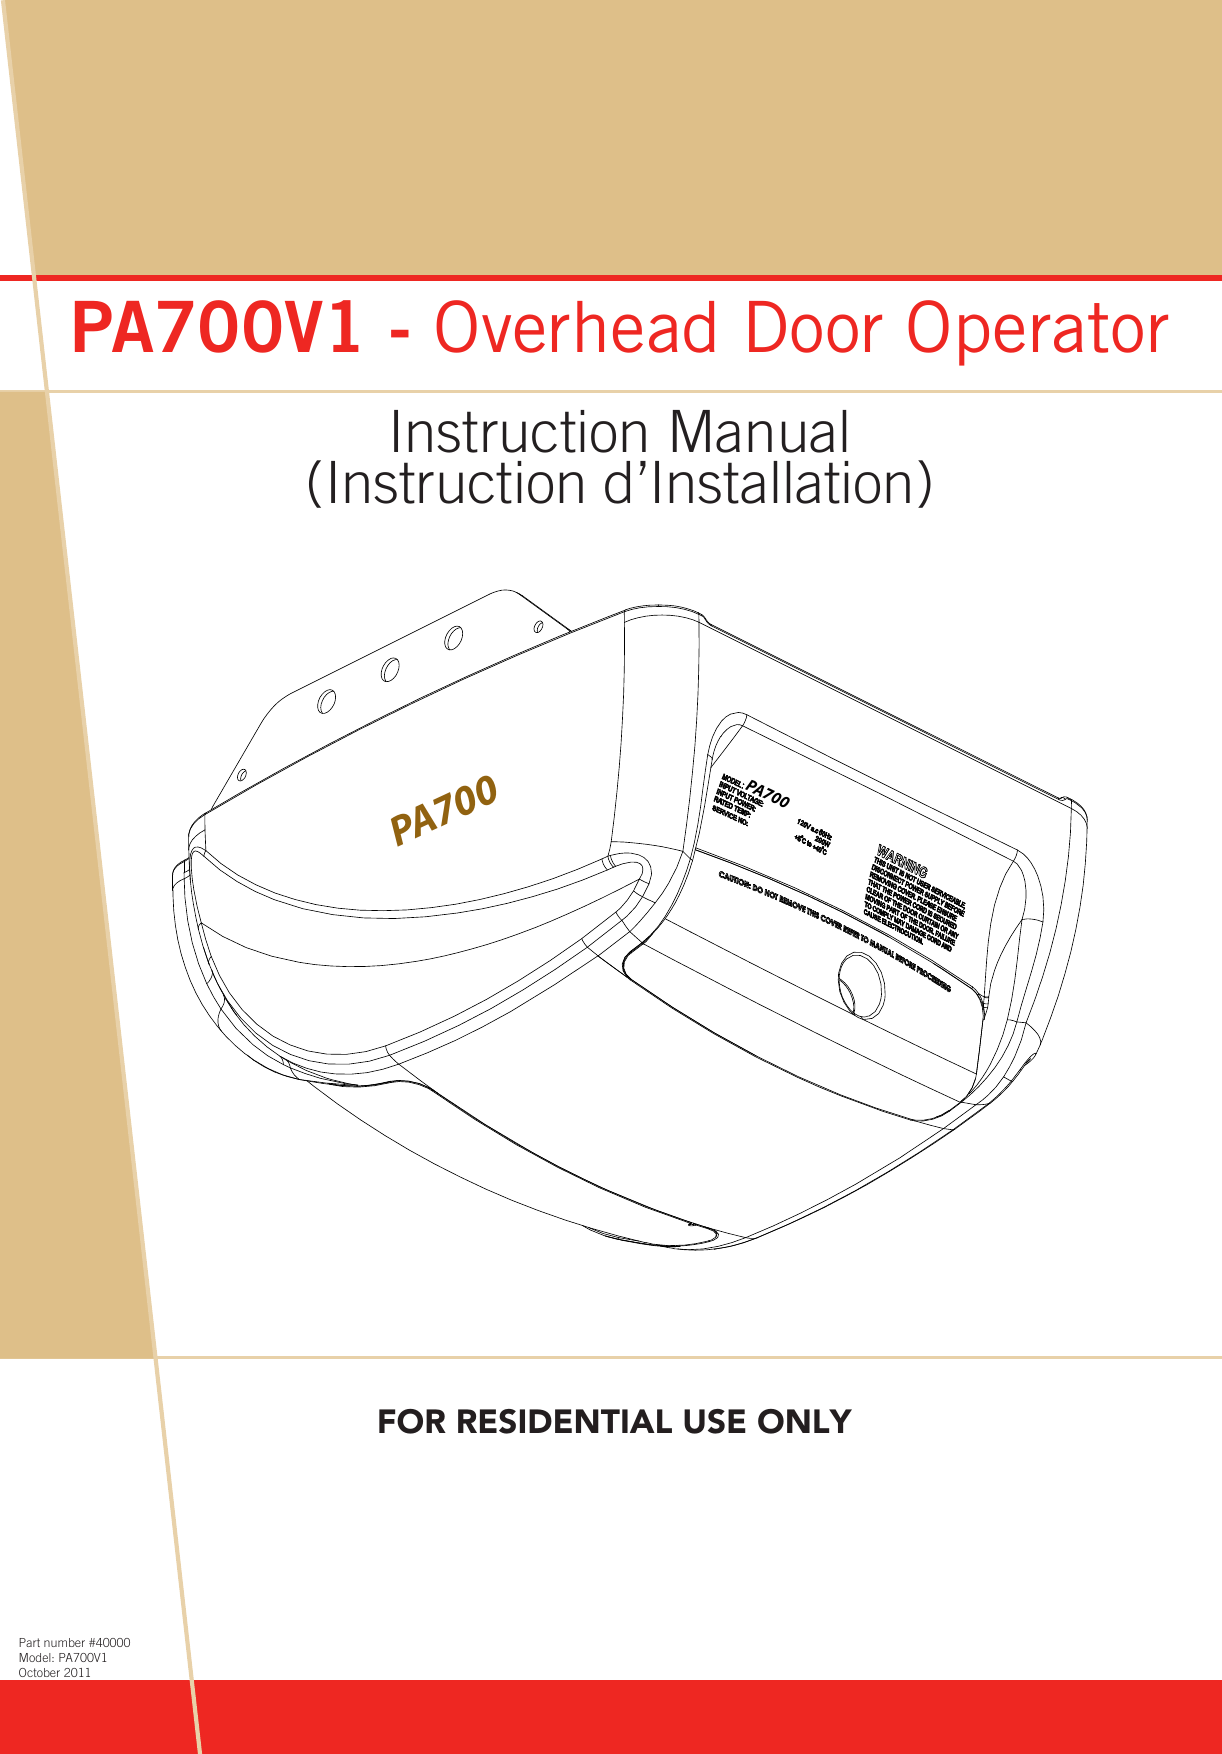 www.bnd.com.auPA700V1 - Overhead Door OperatorInstruction Manual Part number #40000Model: PA700V1October 2011PA700PA700FOR RESIDENTIAL USE ONLY(Instruction d’Installation)